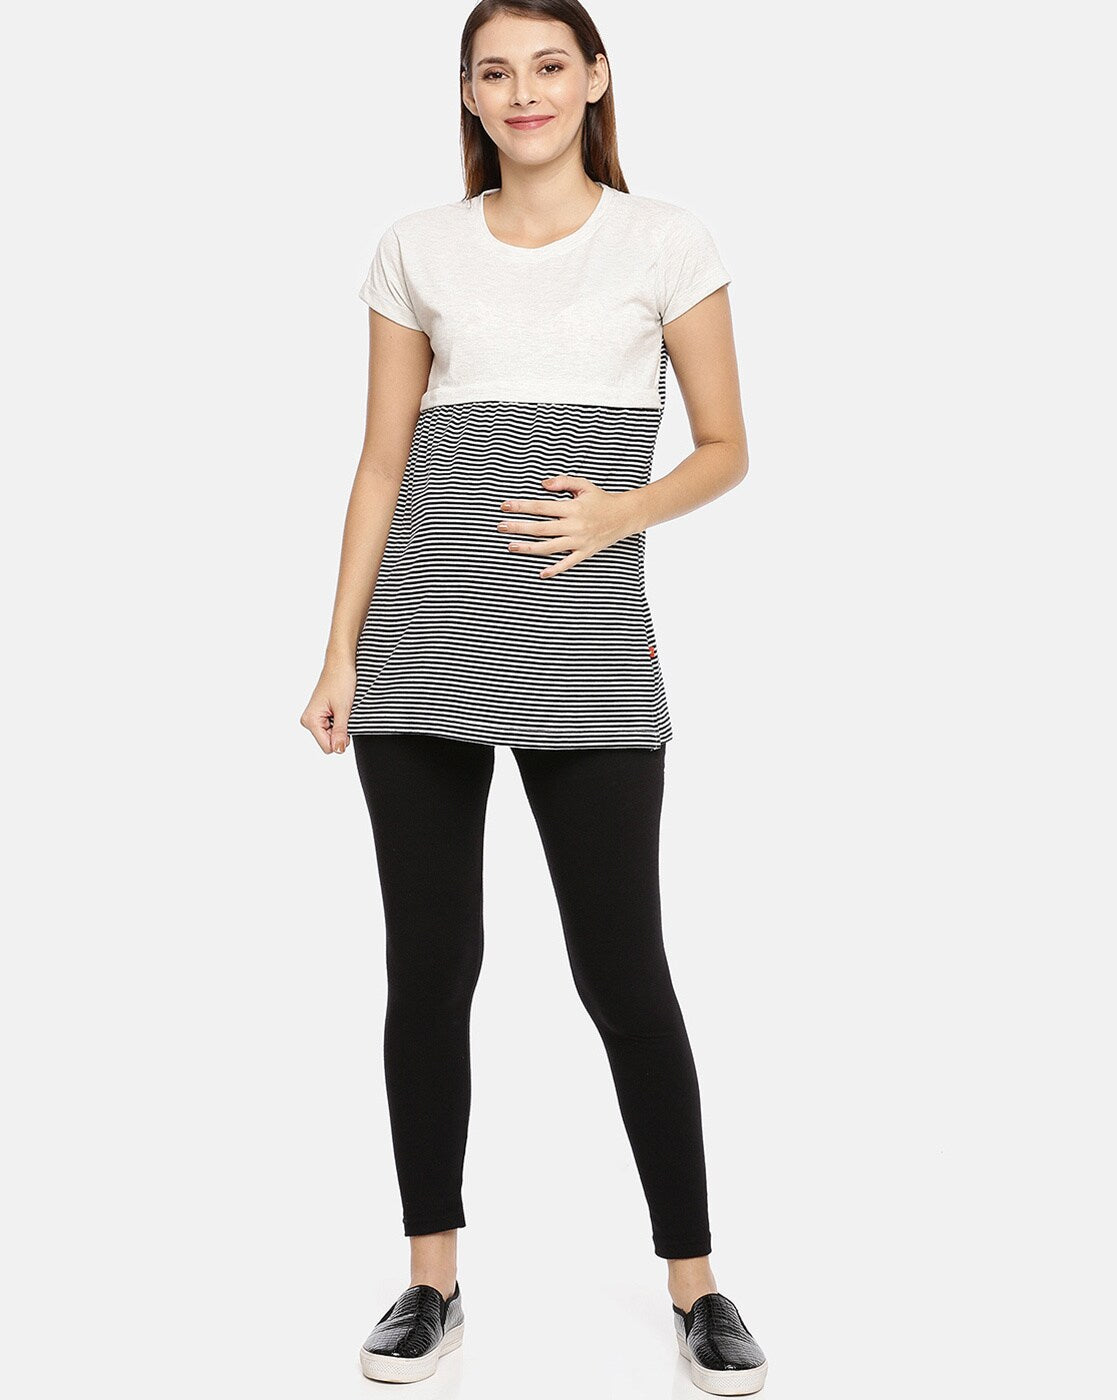 Womens Striped Longline Maternity Tees - Off white